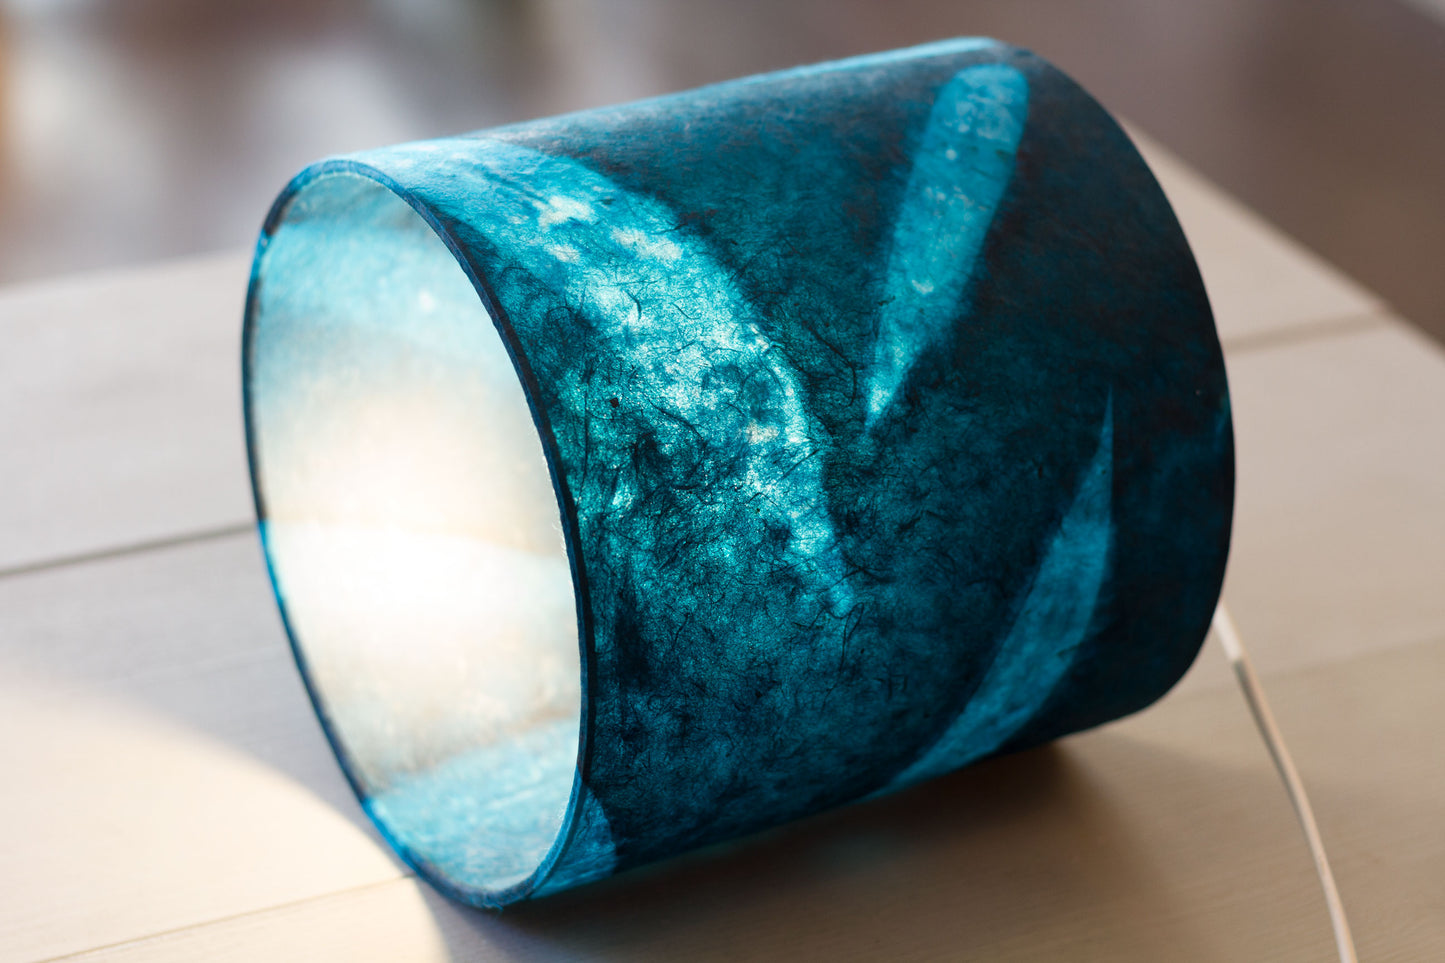 Drum Lamp Shade - P99 - Resistance Dyed Teal Bamboo, 70cm(d) x 30cm(h)